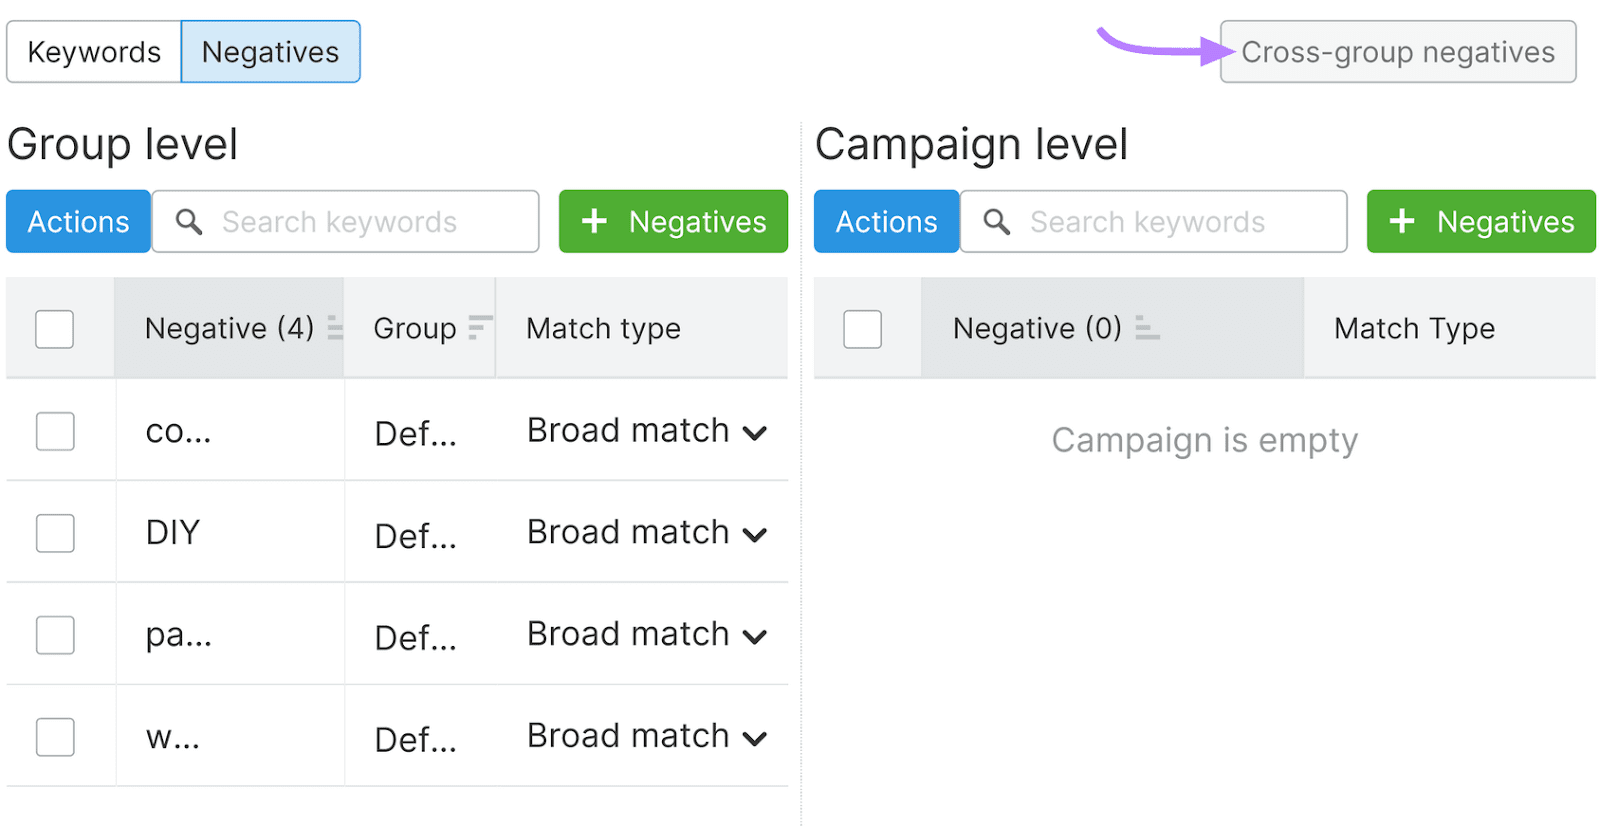 PPC Keyword Tool displaying negative keywords settings, with the button "Cross-group negatives" pointed to by a purple arrow.